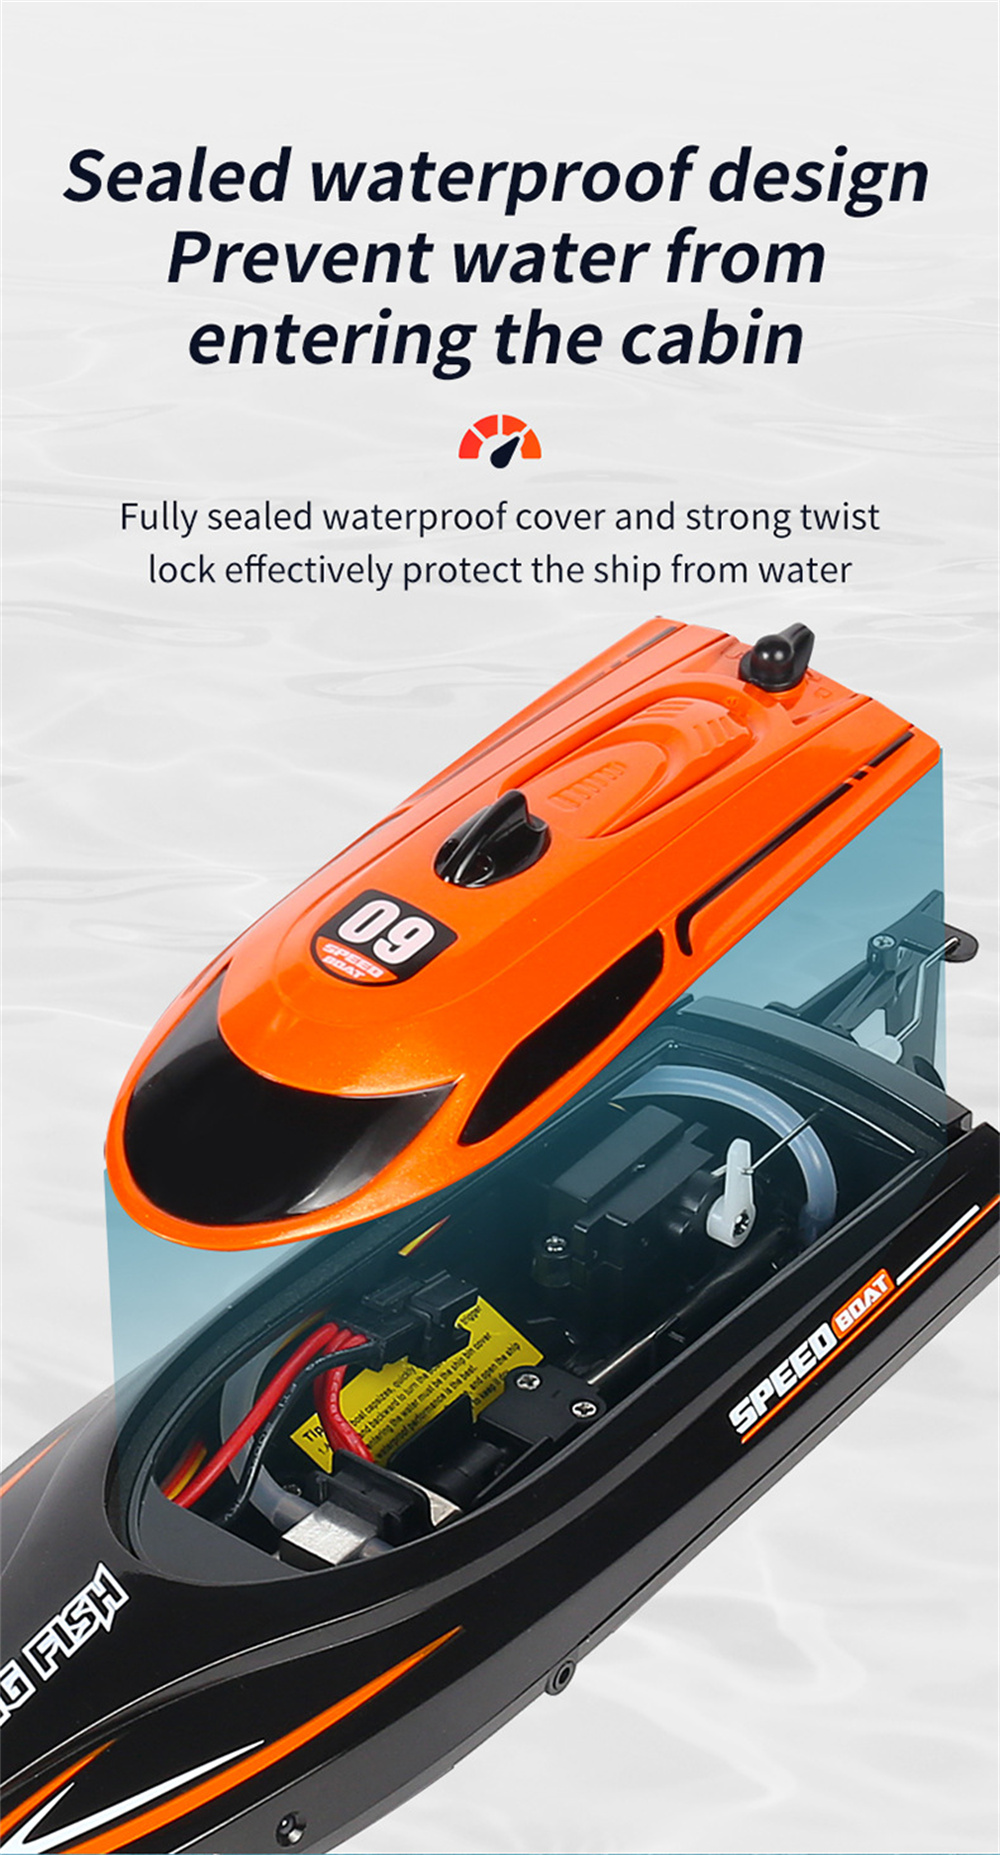 HXJRC HJ812 2.4G 4CH RC Boat High Speed LED Light Speedboat Waterproof 25km/h Electric Racing Vehicles Models Lakes Pools Remote Control Toys